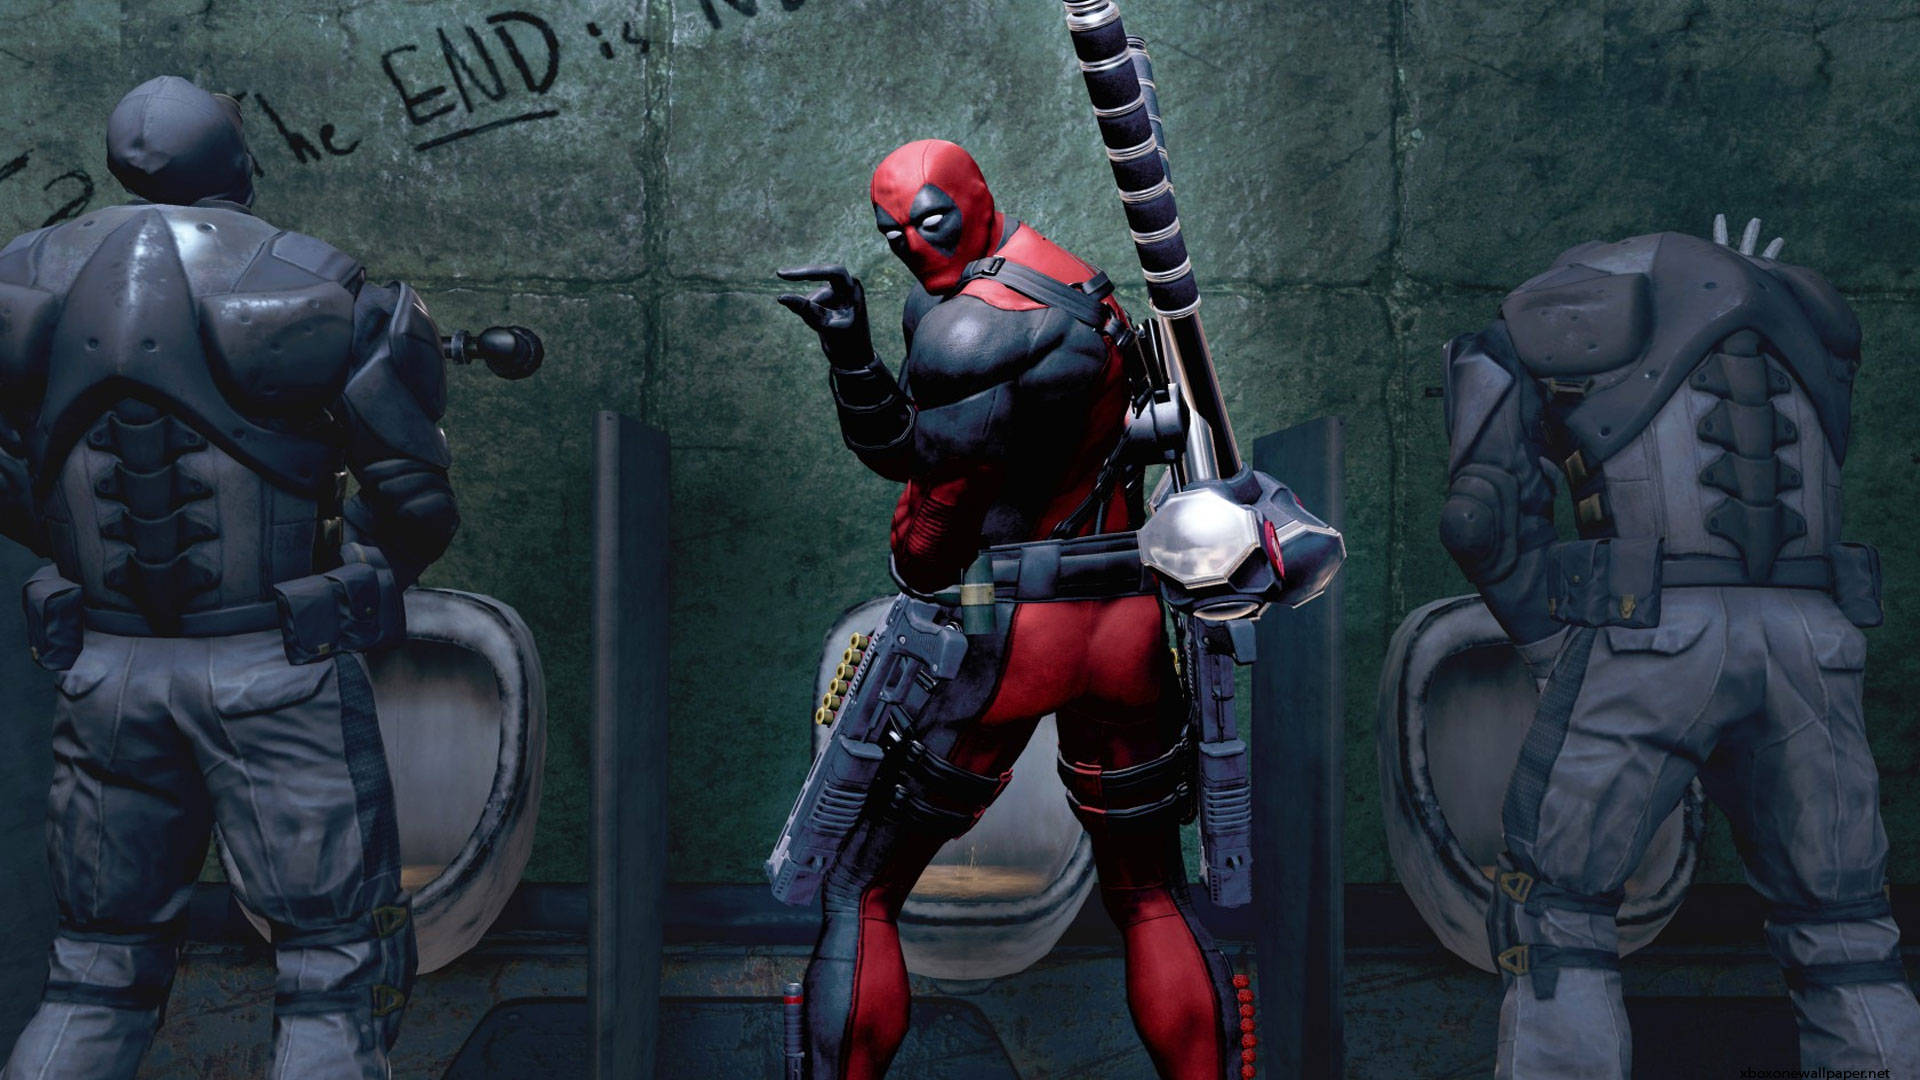 Marvelxbox Deadpool Urinal In Spanish Can Be Translated As 